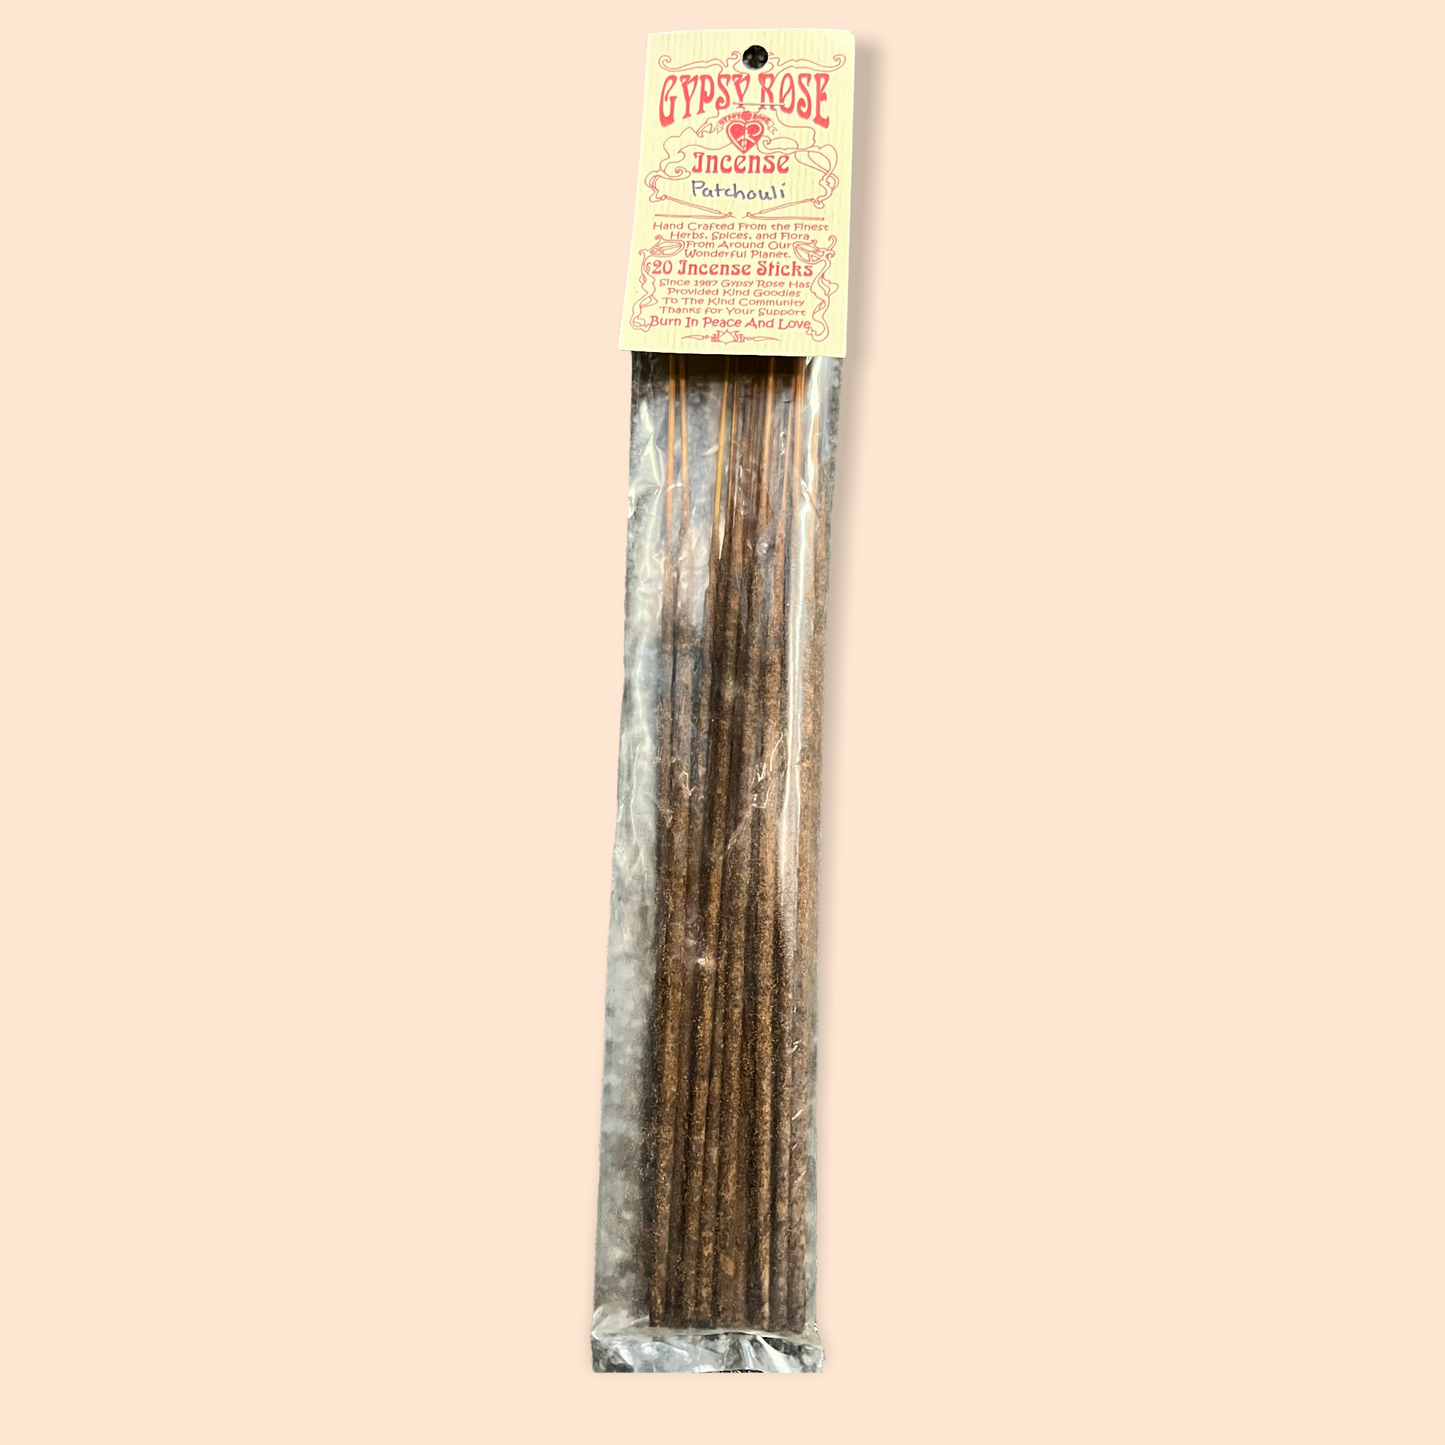 Gypsy Rose Incense 20 Pack